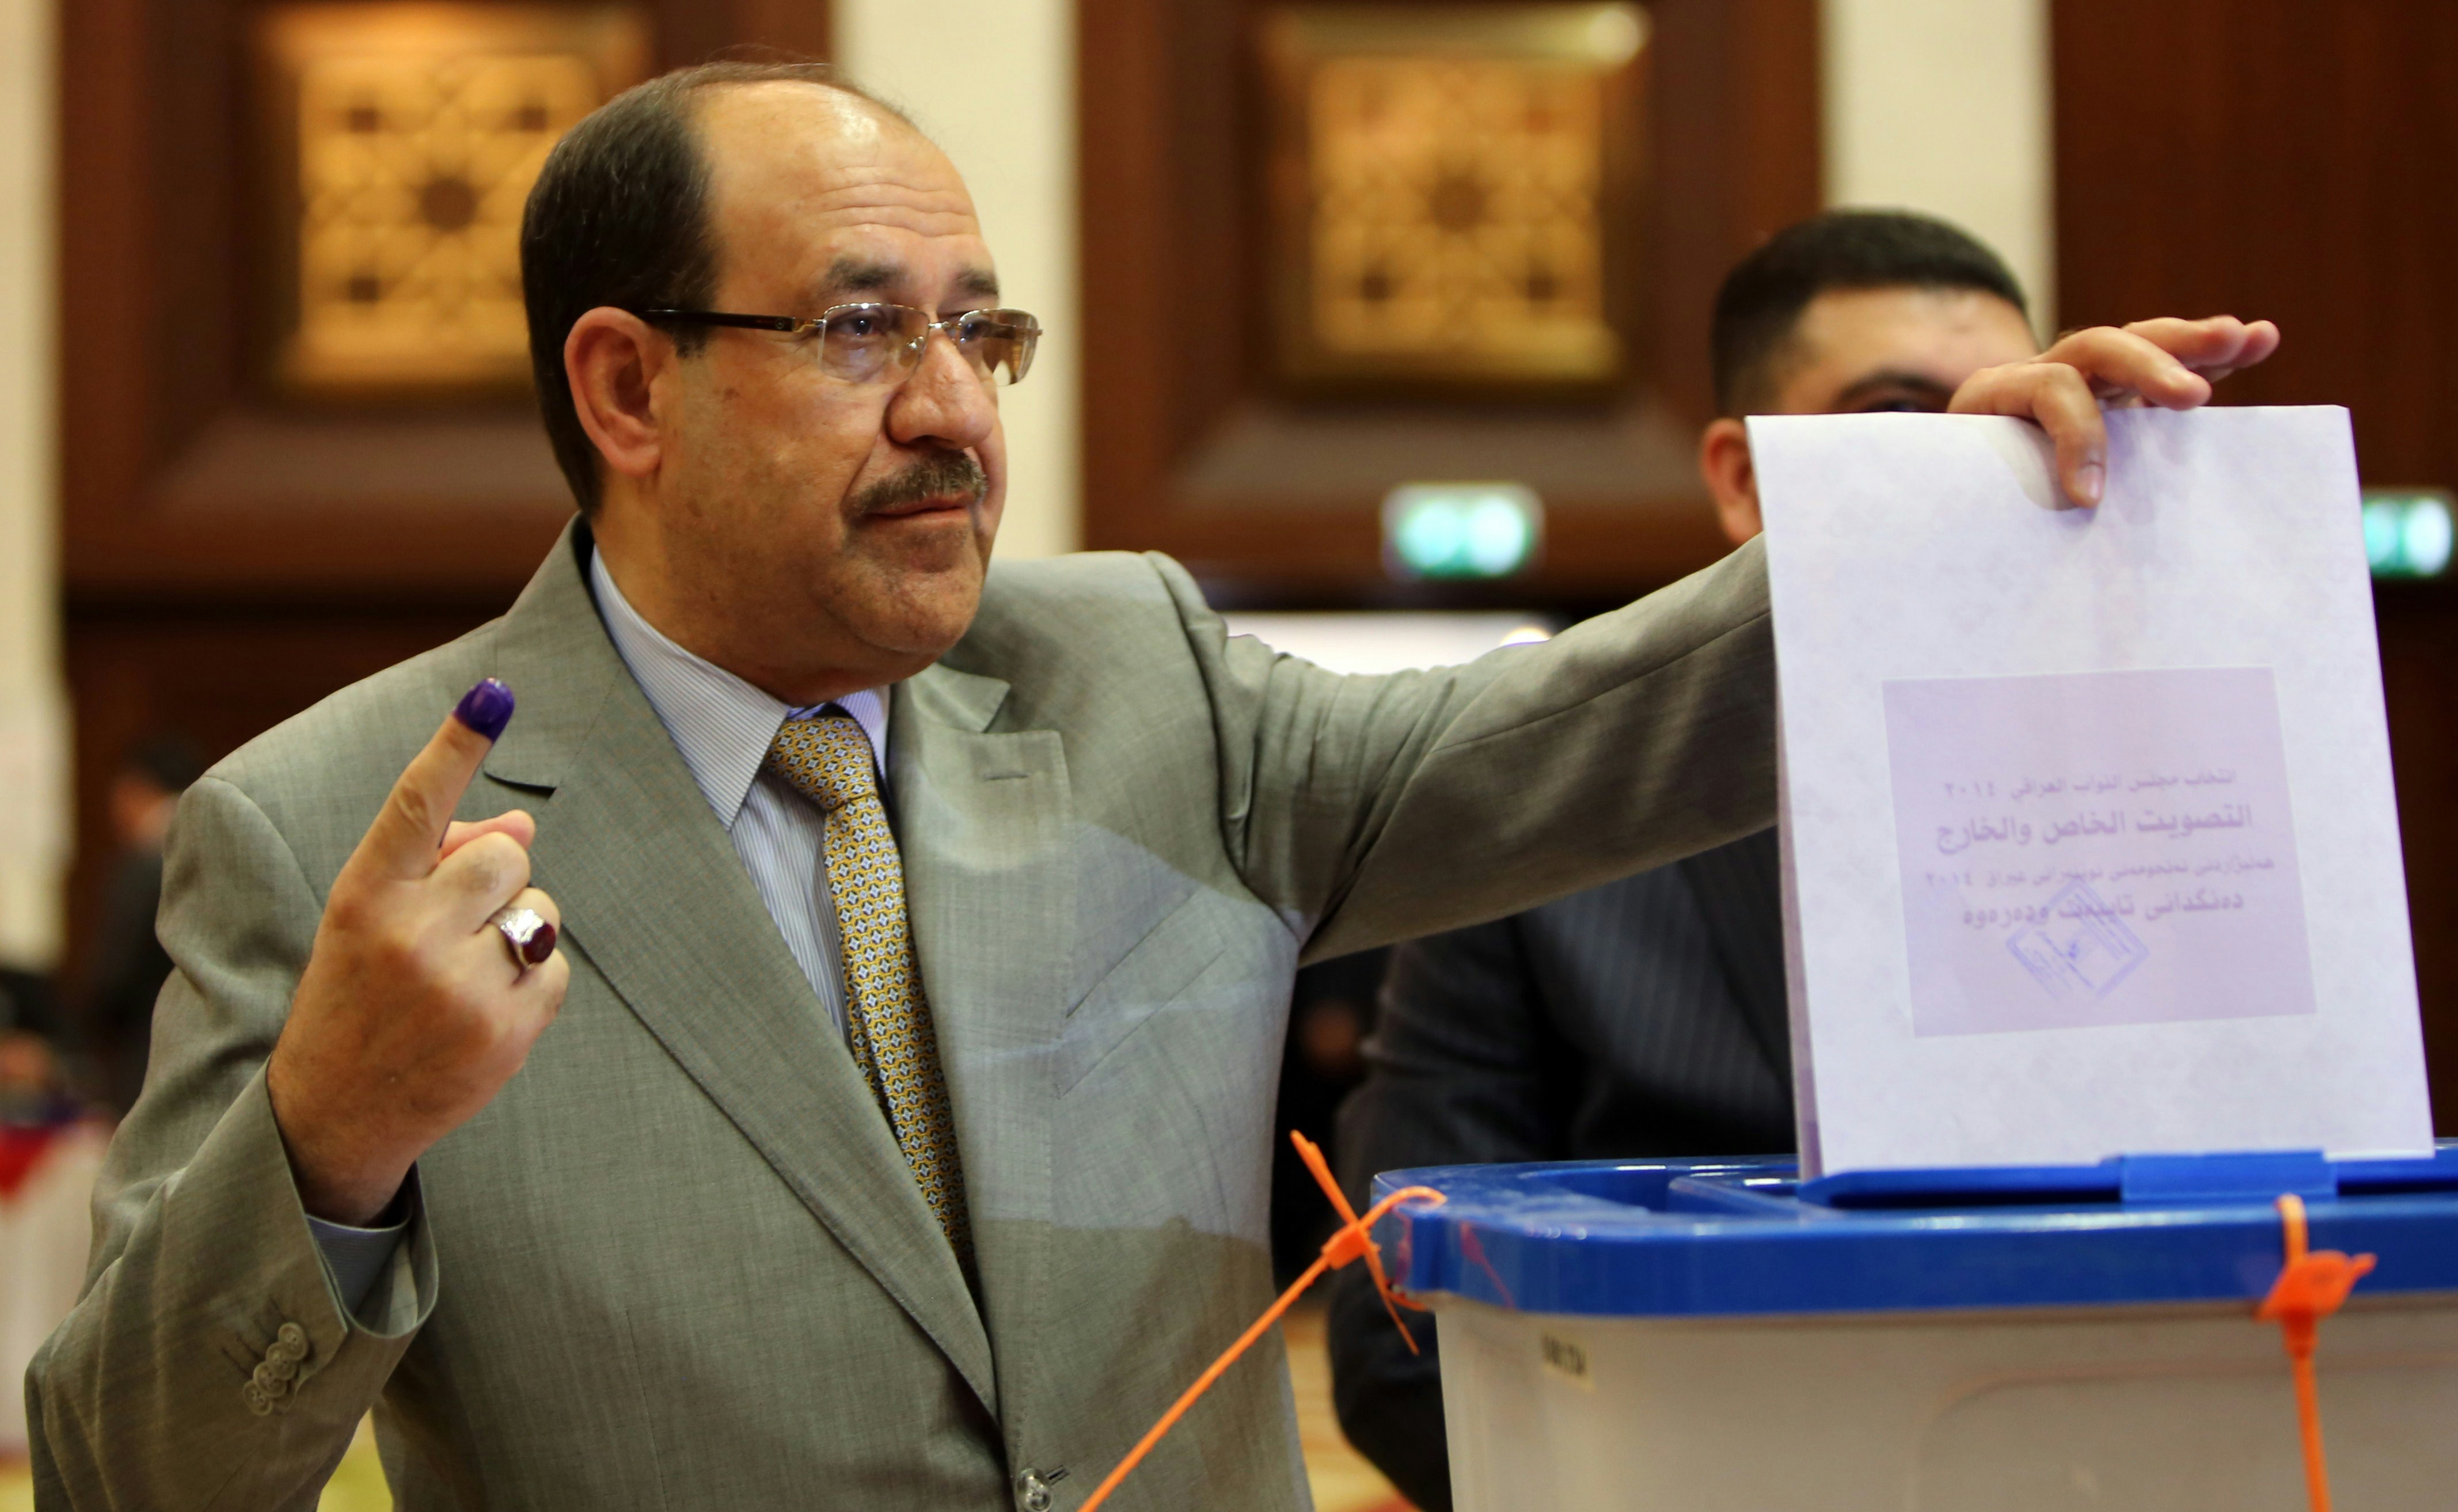 Iraqi Prime Minister Nuri al-Maliki shows his ink-stained finger as he casts his vote in Iraq's first parliamentary election since US troops withdrew at a polling station in Baghdad's Green Zone on April 30, 2014. Iraqis streamed to voting centres nationwide, amid the worst bloodshed in years, as Maliki seeks reelection. AFP PHOTO / ALI AL-SAADI        (Photo credit should read ALI AL-SAADI/AFP via Getty Images)